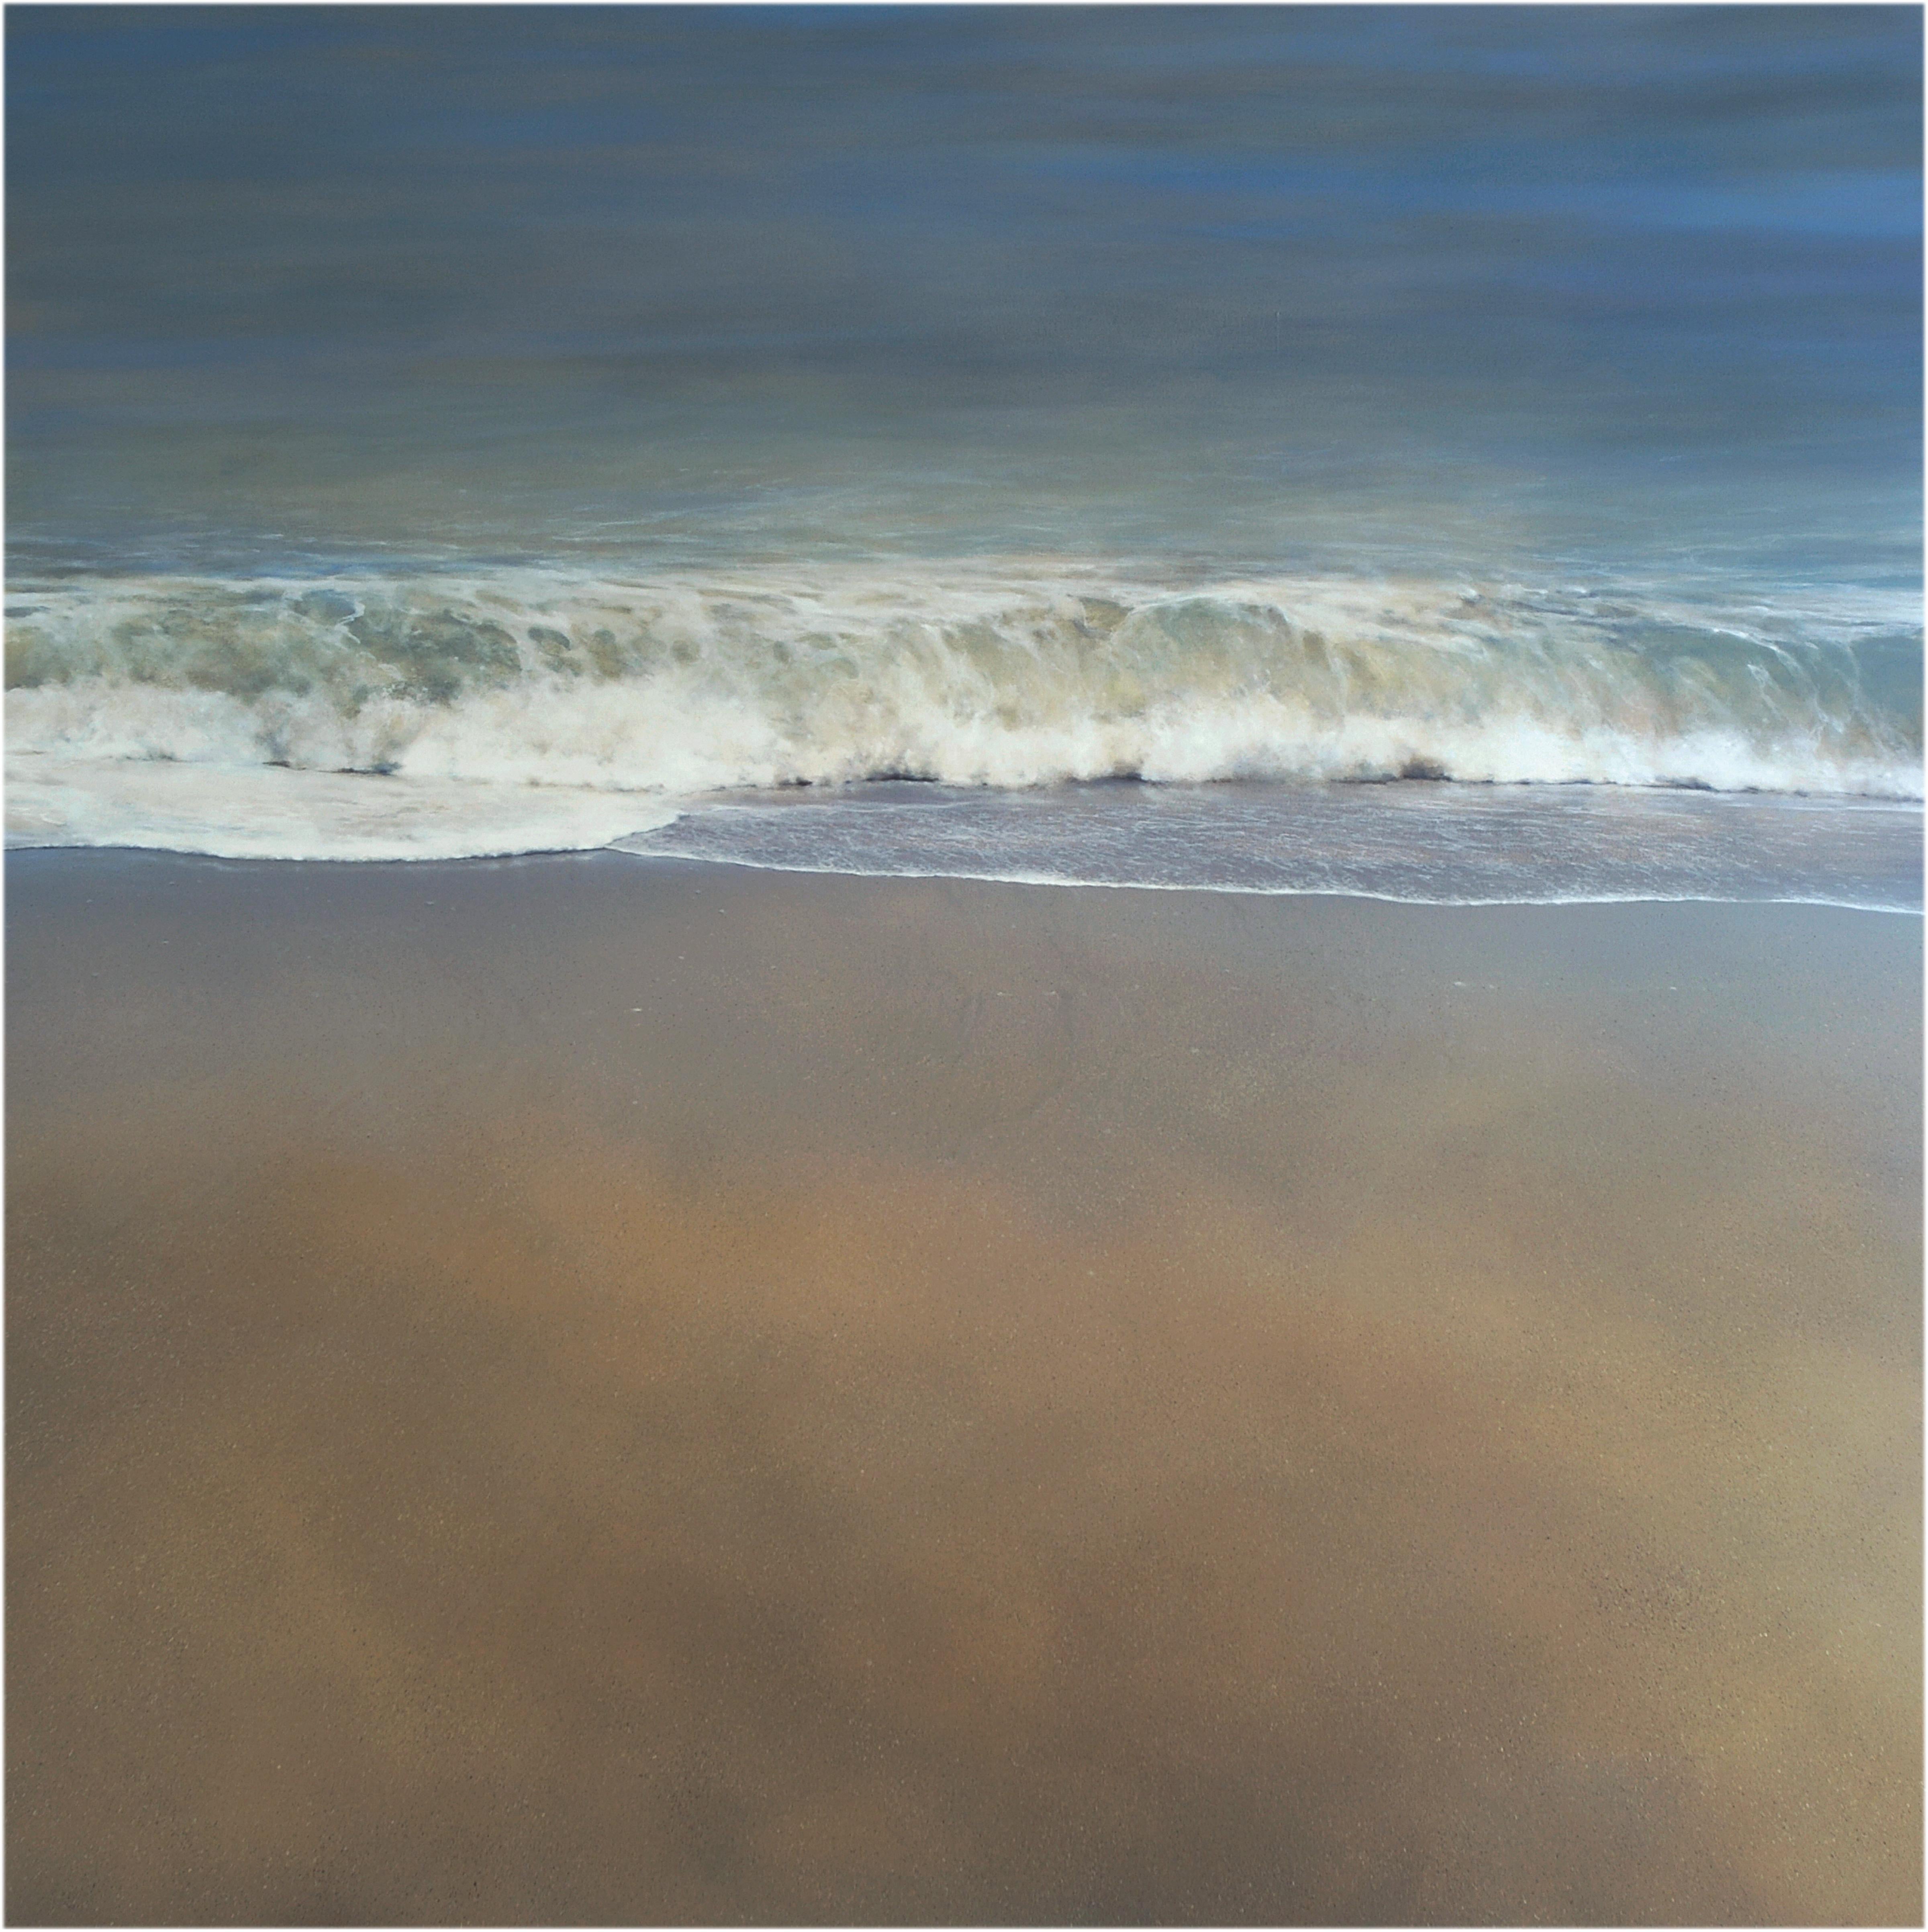 30 x 30 inches   Giclee print on canvas from an original oil painting.
(Edition 1 of 500) 

Todd Kenyon conjures the carefree exuberance of a perfect day spent on a deserted beach. Kenyon's unfettered paintings balance air, water, earth with